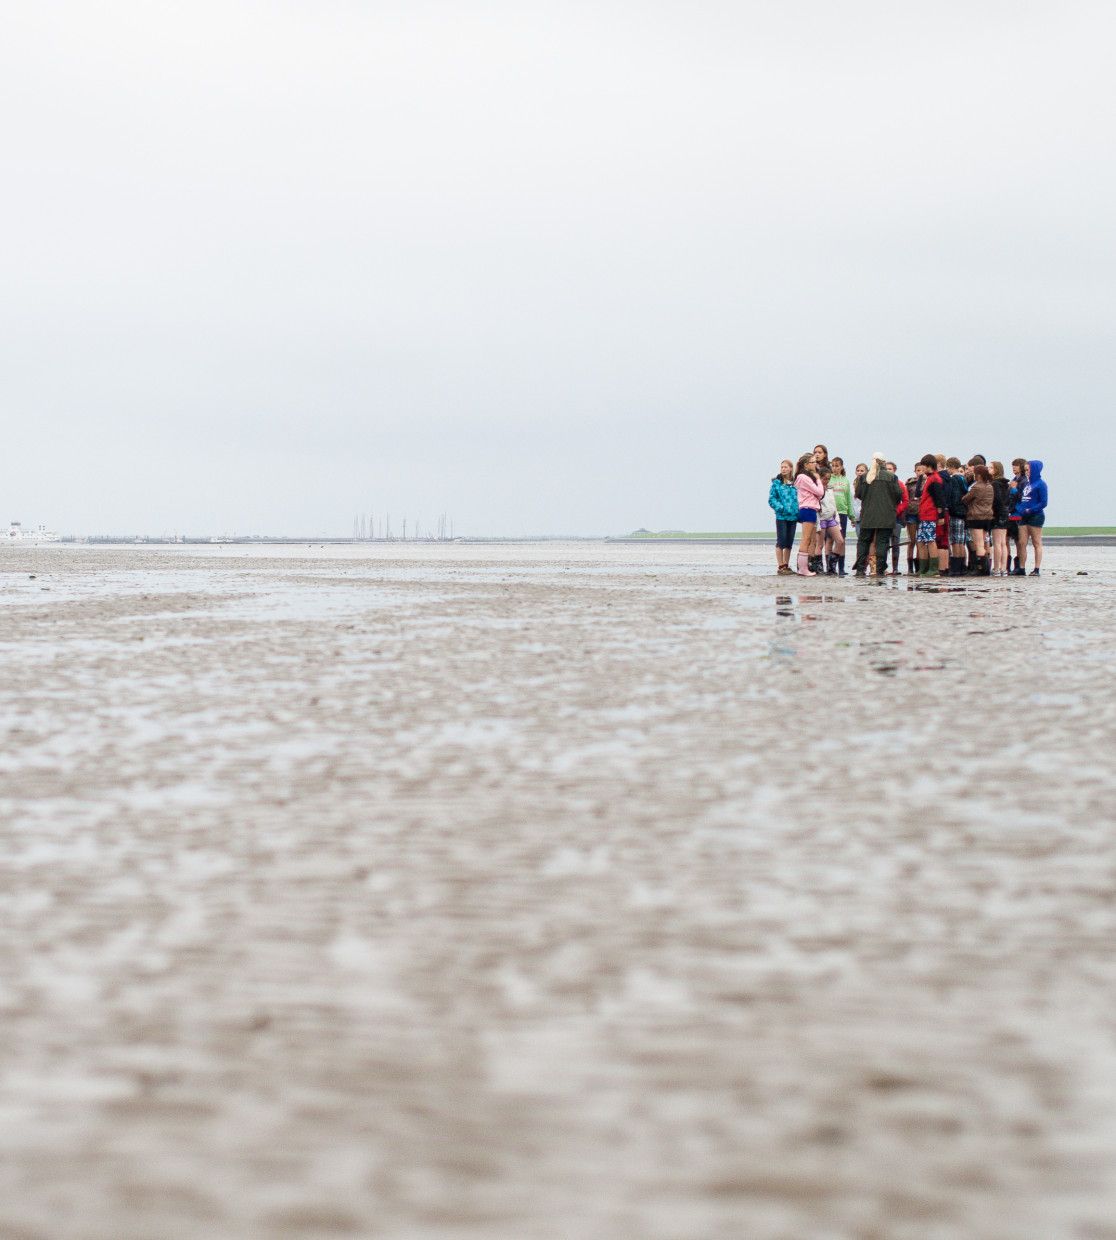 So much to see, do and experience  - Wadden.nl